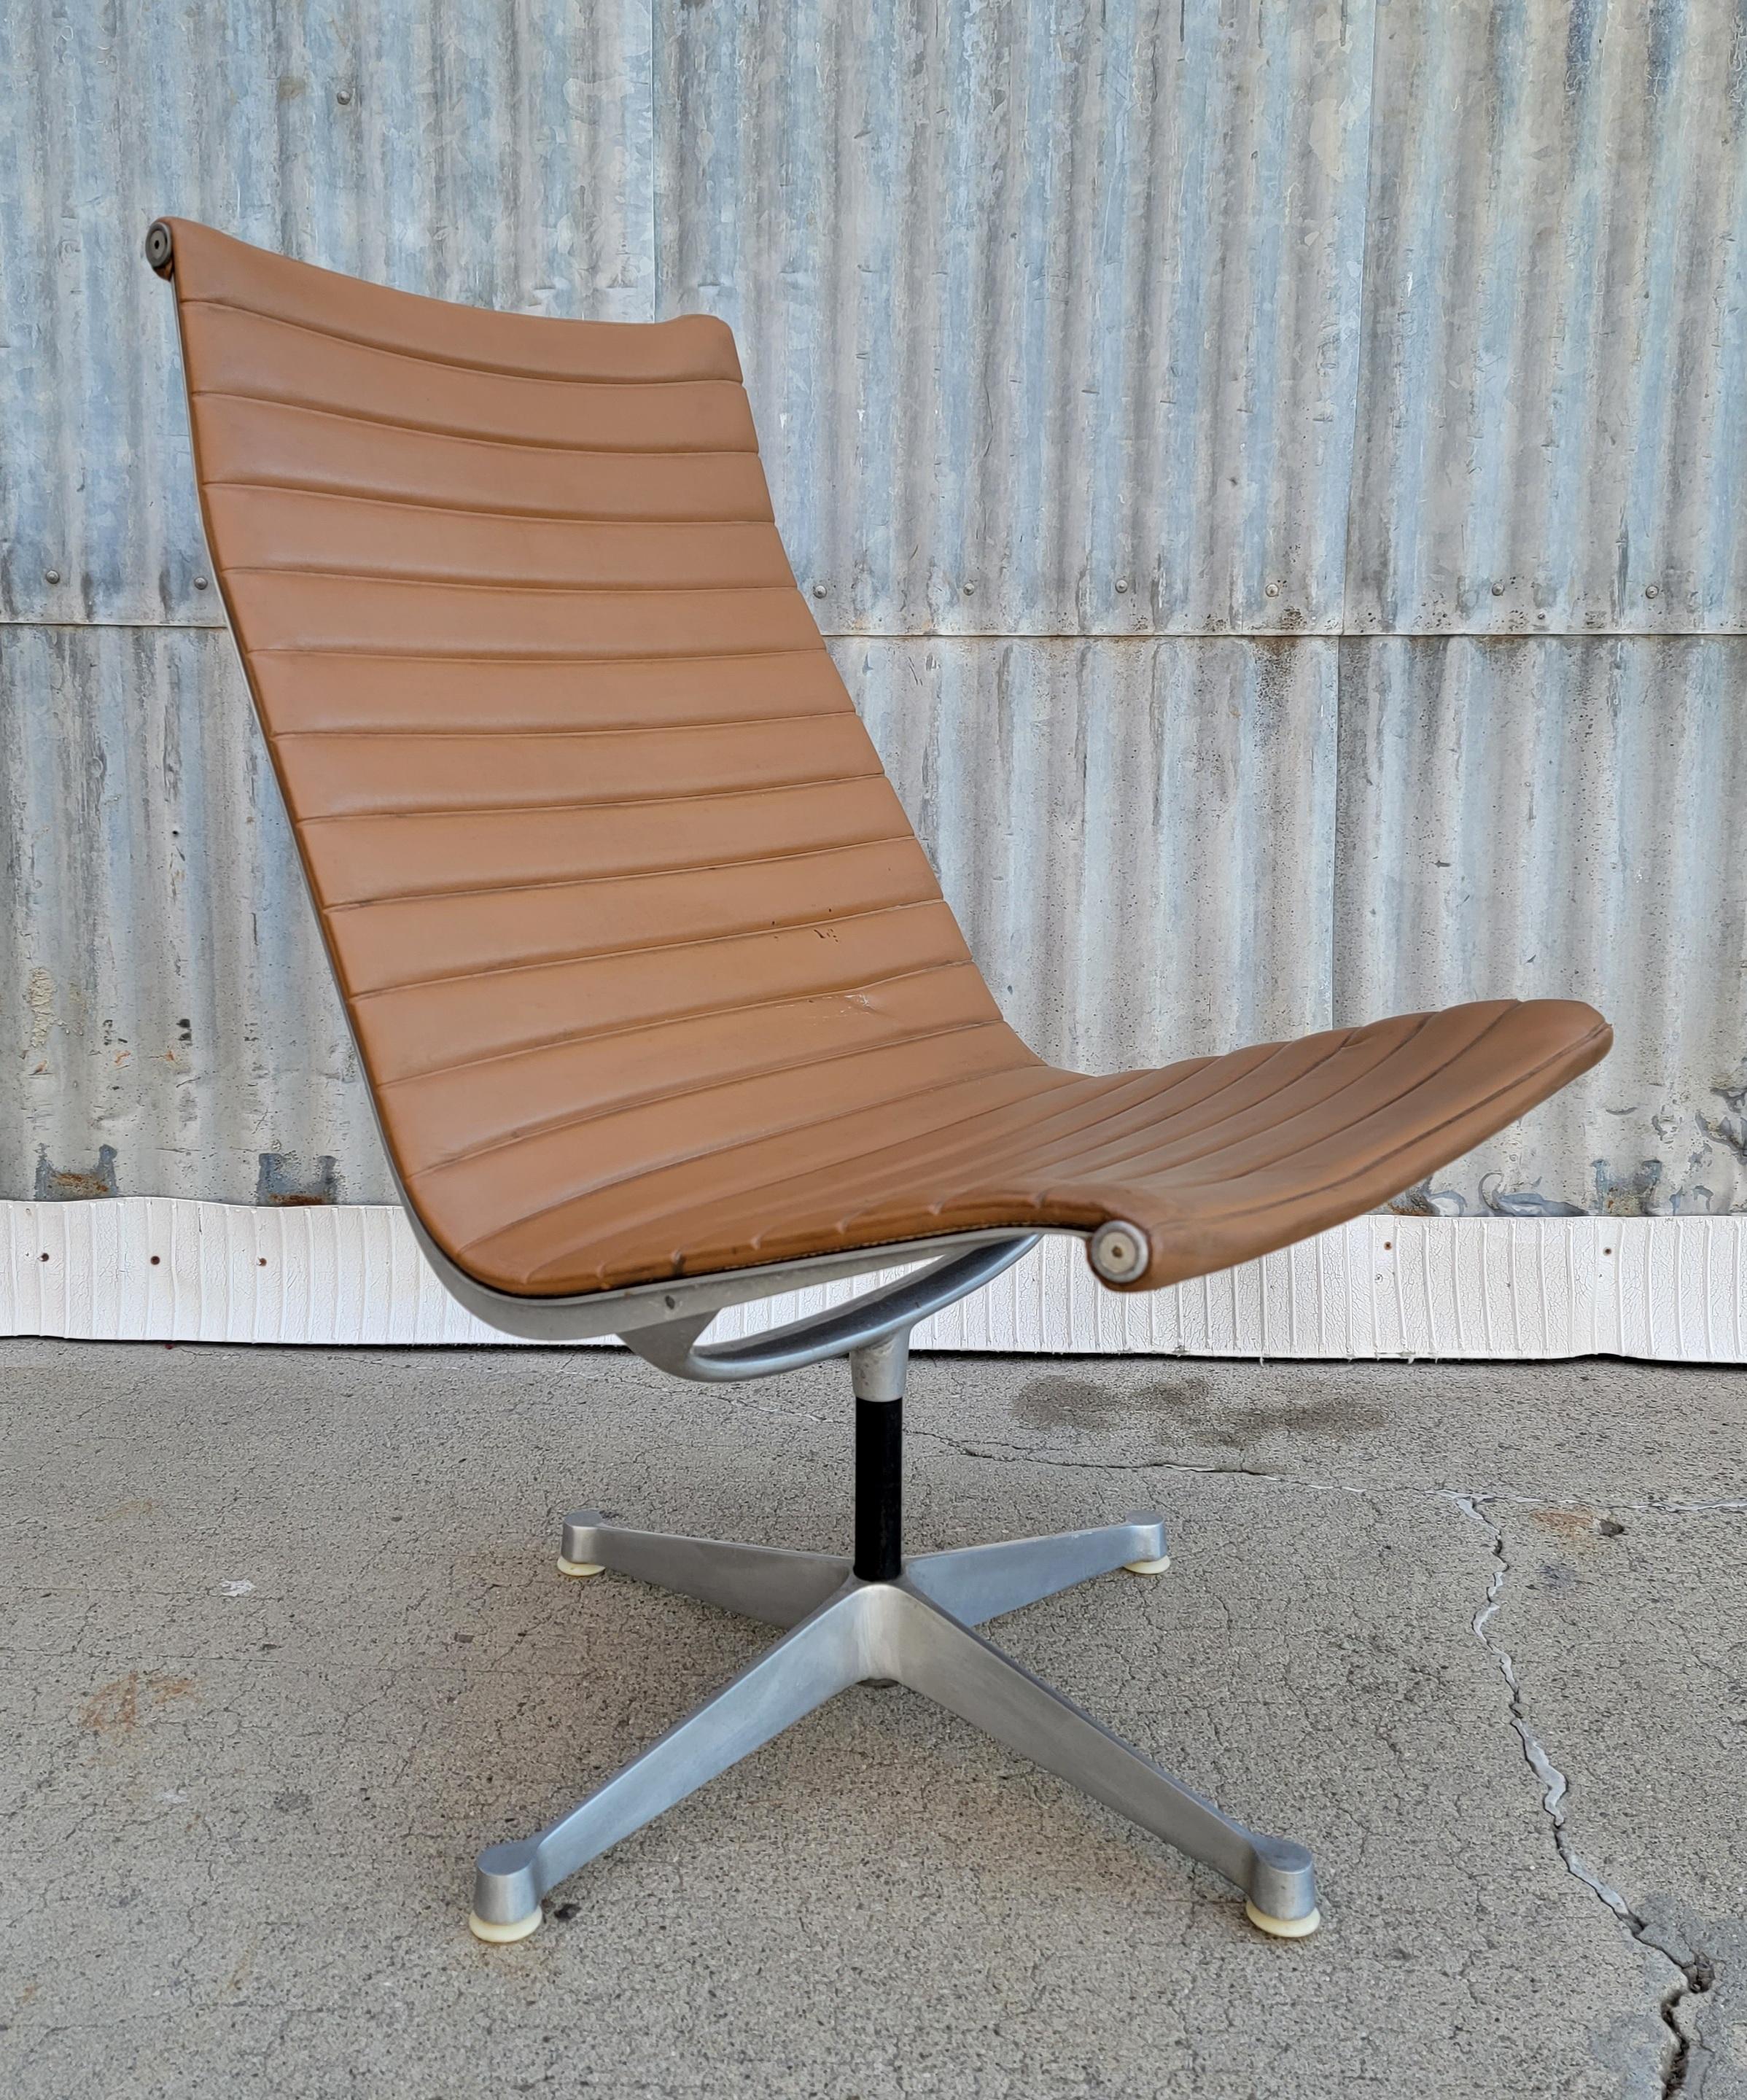 Early production charles & Ray Eames aluminum group chair. If you are seeking an original vintage Eames chairs with patina and character from use, this may be a contender. Signed with Herman Miller logo cast into frame. Structural integrity intact.